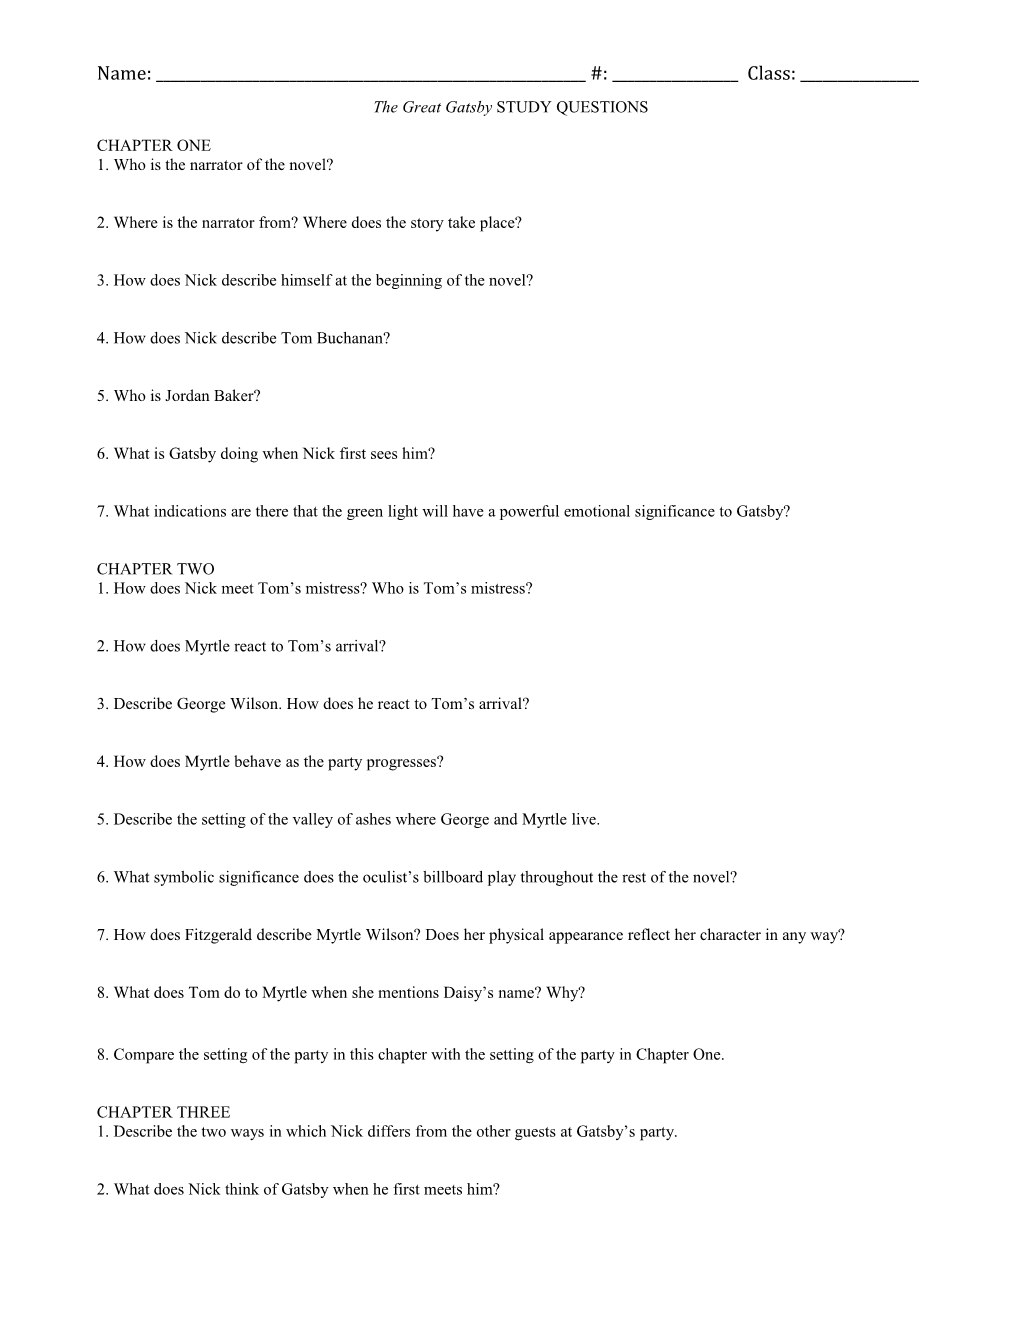 The Great Gatsby STUDY QUESTIONS